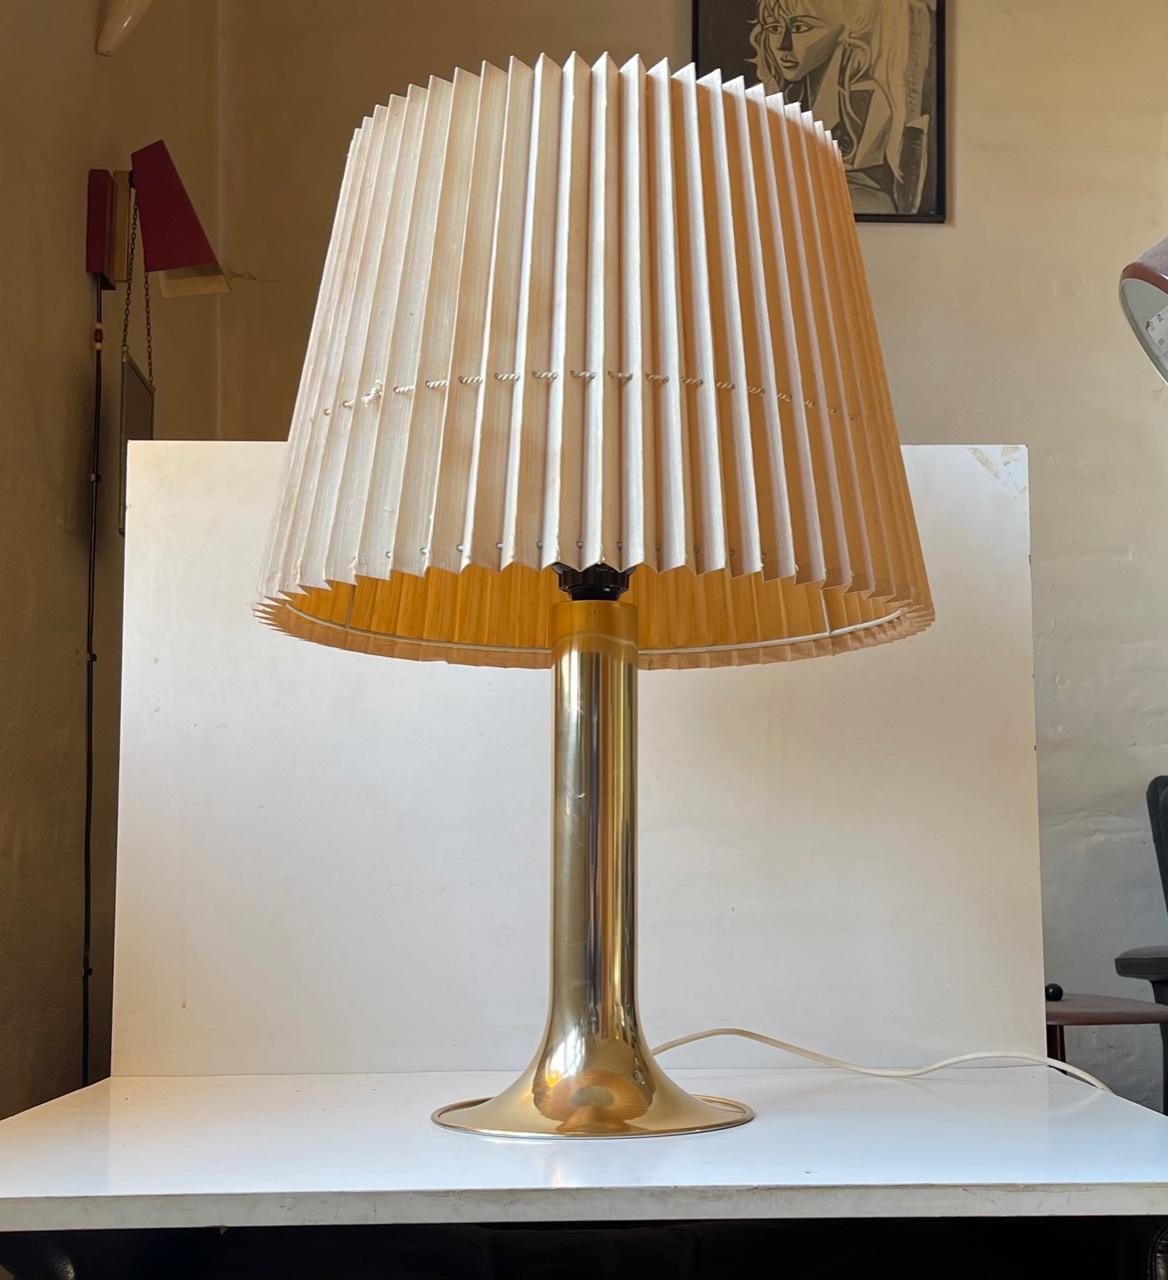 A large trumpet shaped table light executed in brass-alloyed aluminium. Manufactured by Fog & Mørup in Denmark circa 1970 in association with the Silhuet pendant lamp series by Jo Hammerborg. This lamp was only made for one year and was redrawn